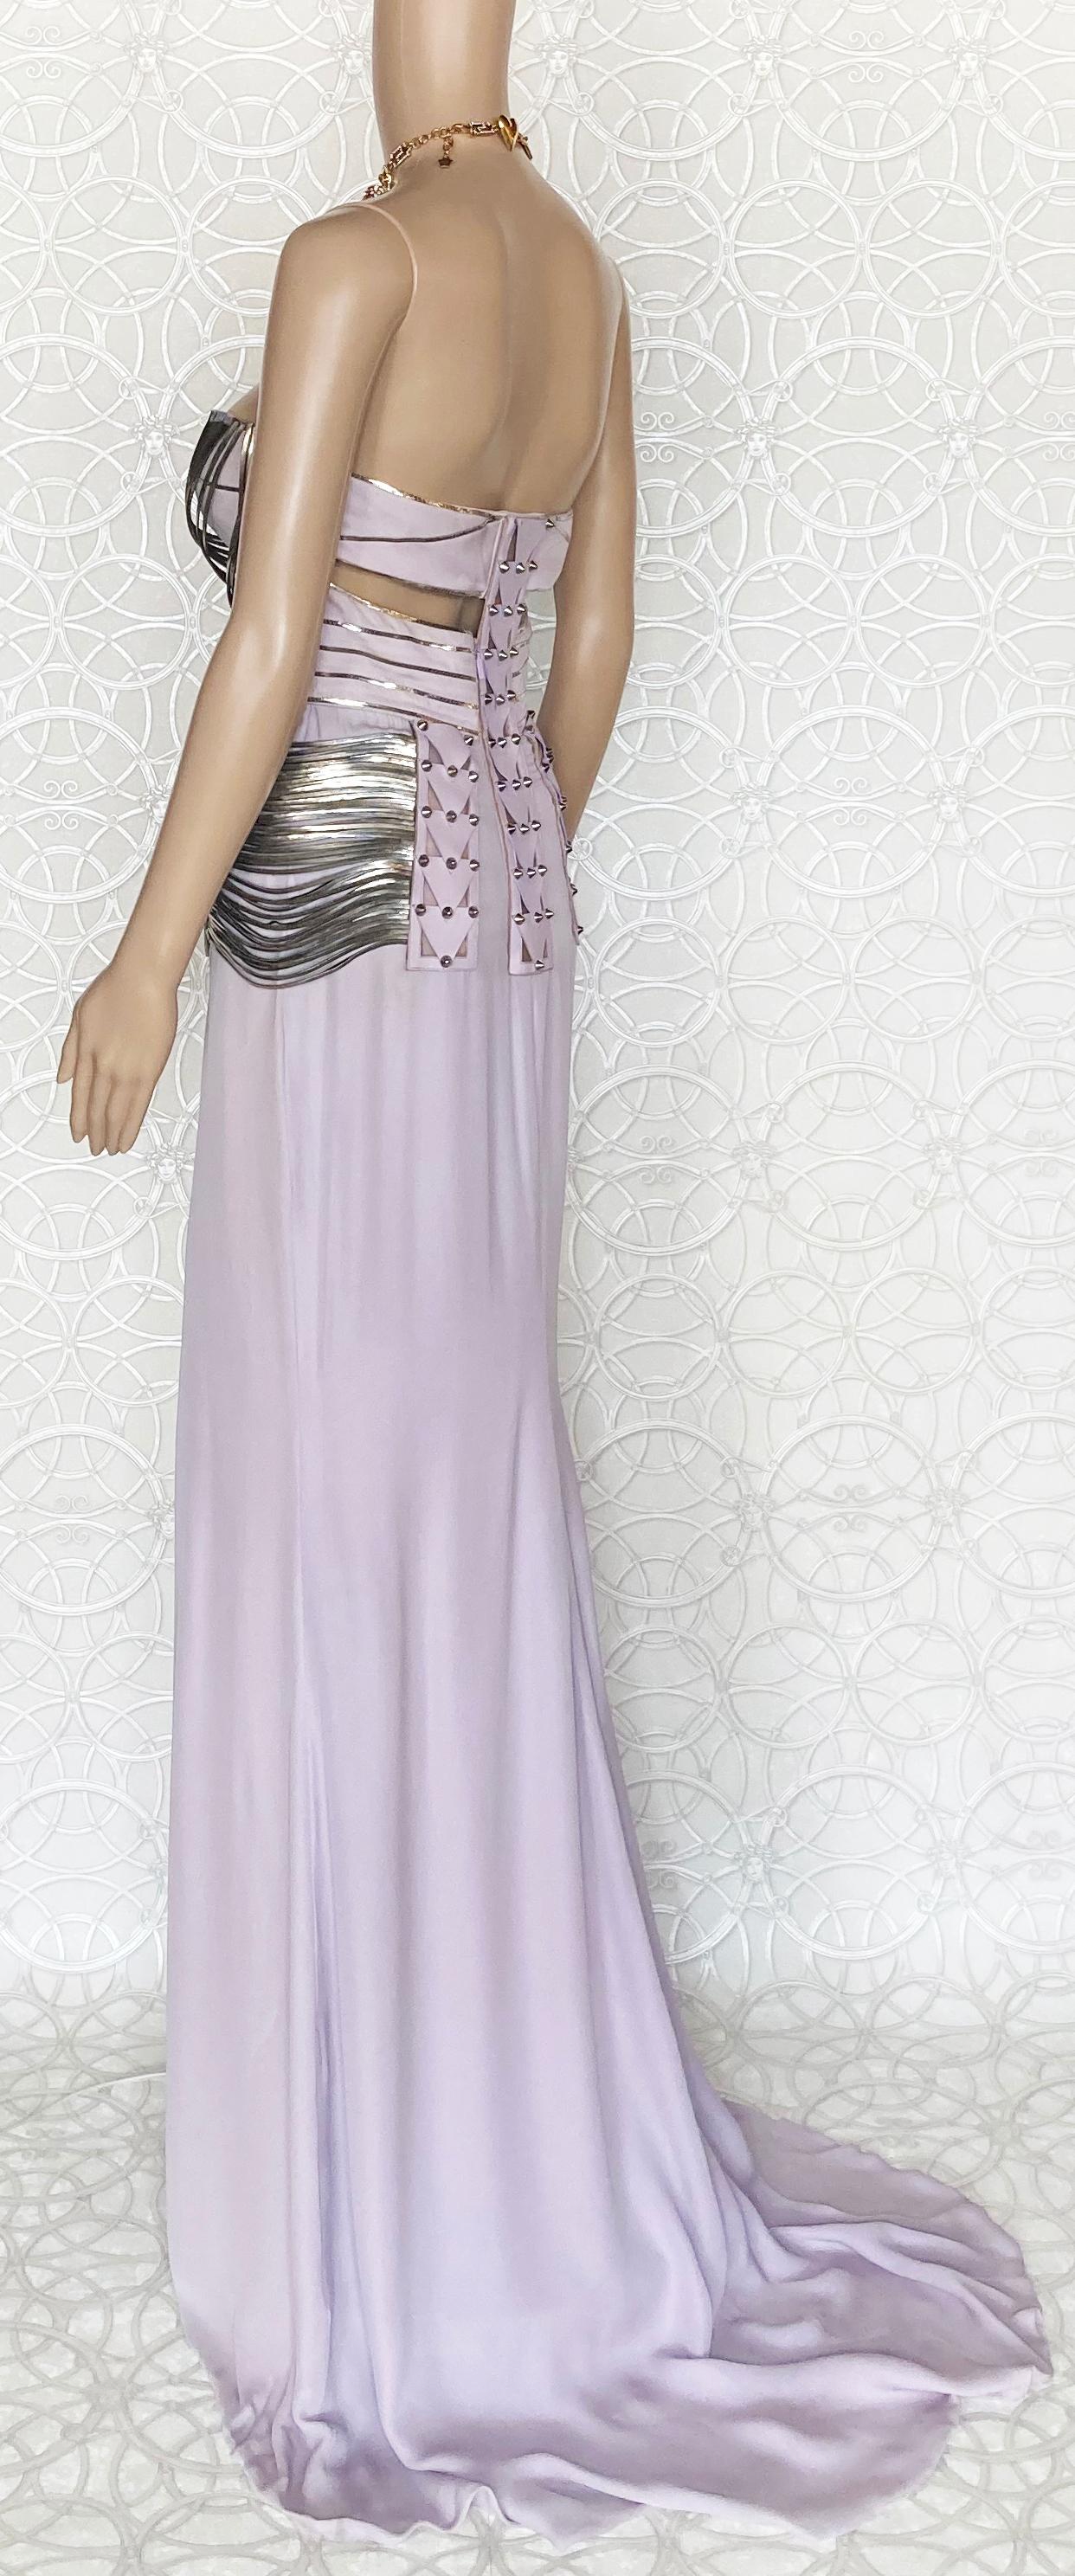 S/S 2010 L# 47 VERSACE EMBELLISHED LONG DRESS GOWN 40 - 4 as seen on DONATELLA For Sale 2